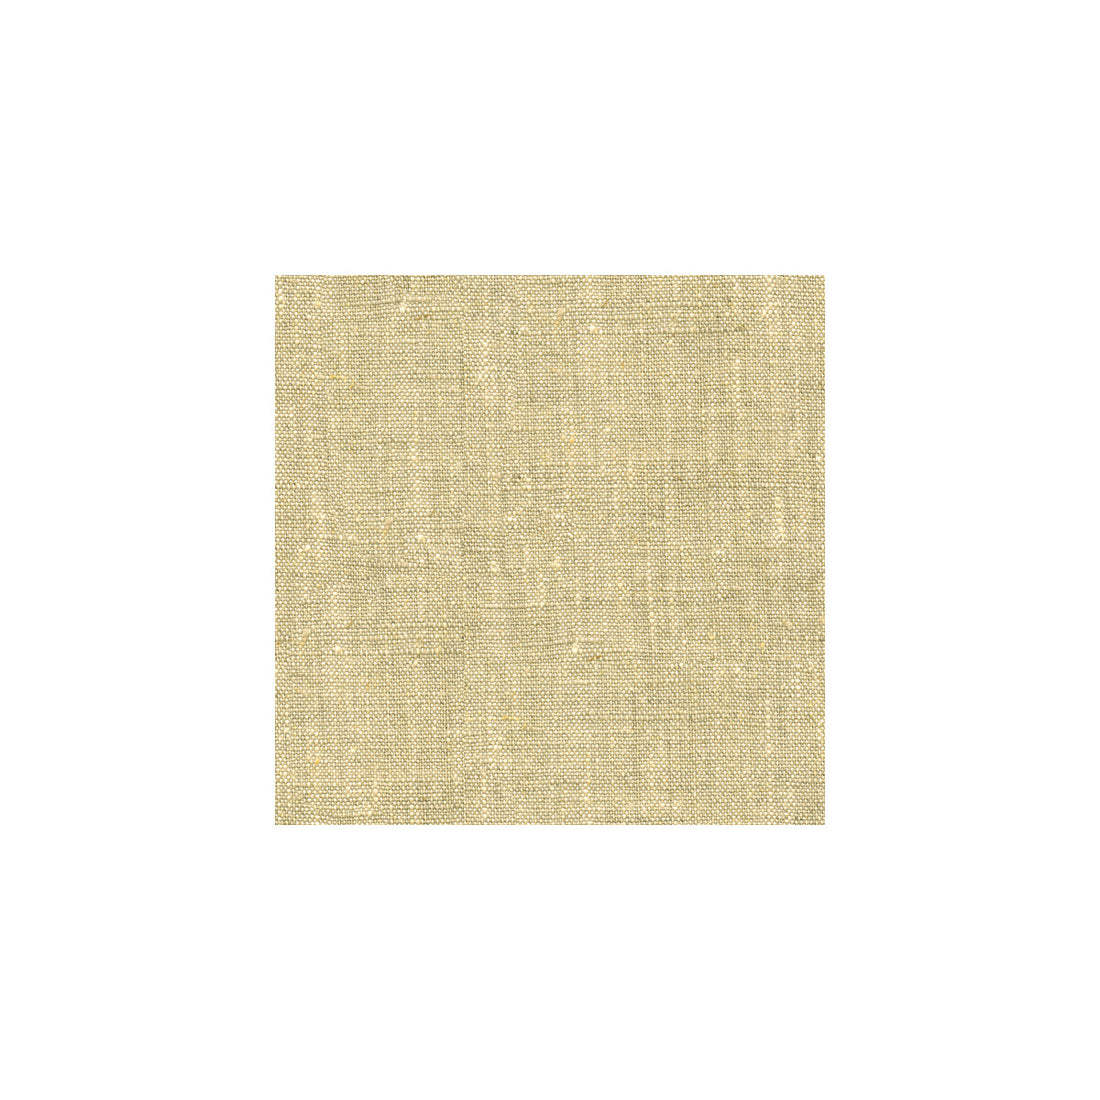 Kravet Basics fabric in 32324-16 color - pattern 32324.16.0 - by Kravet Basics in the Perfect Plains collection